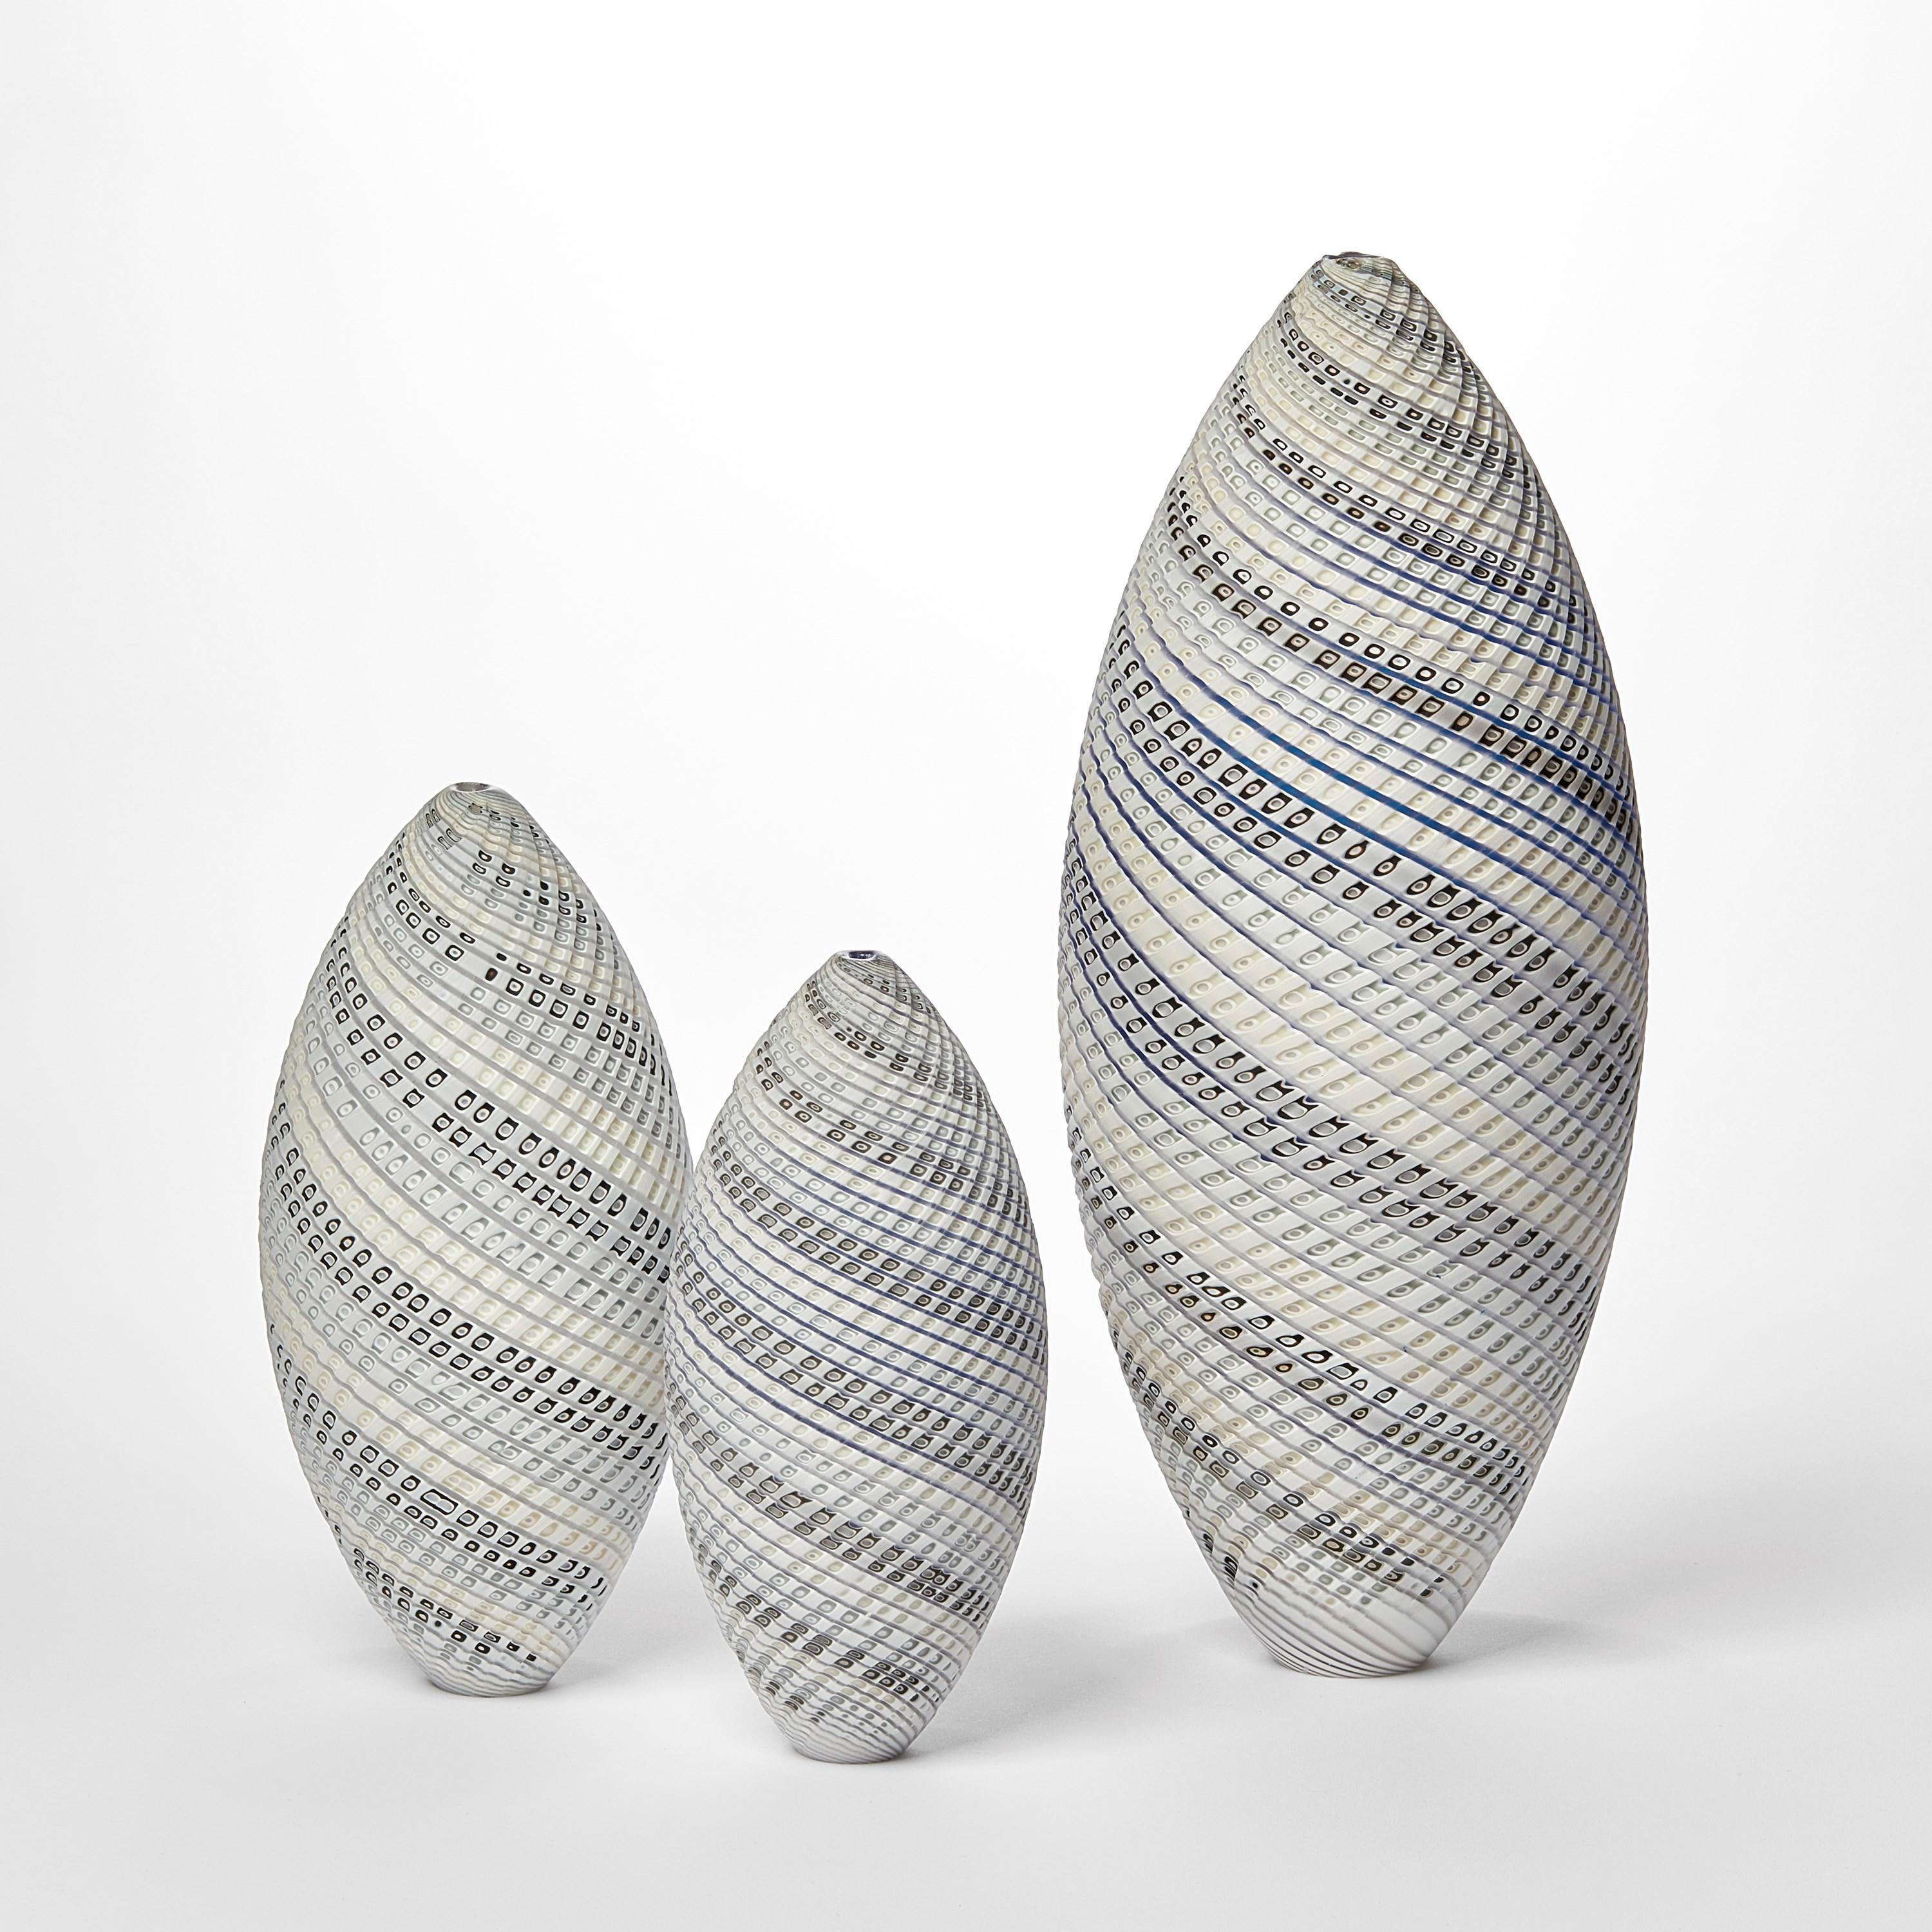 British Woven Two Tone Ovoid (med), neutral pastel handblown glass vessel by Layne Rowe For Sale